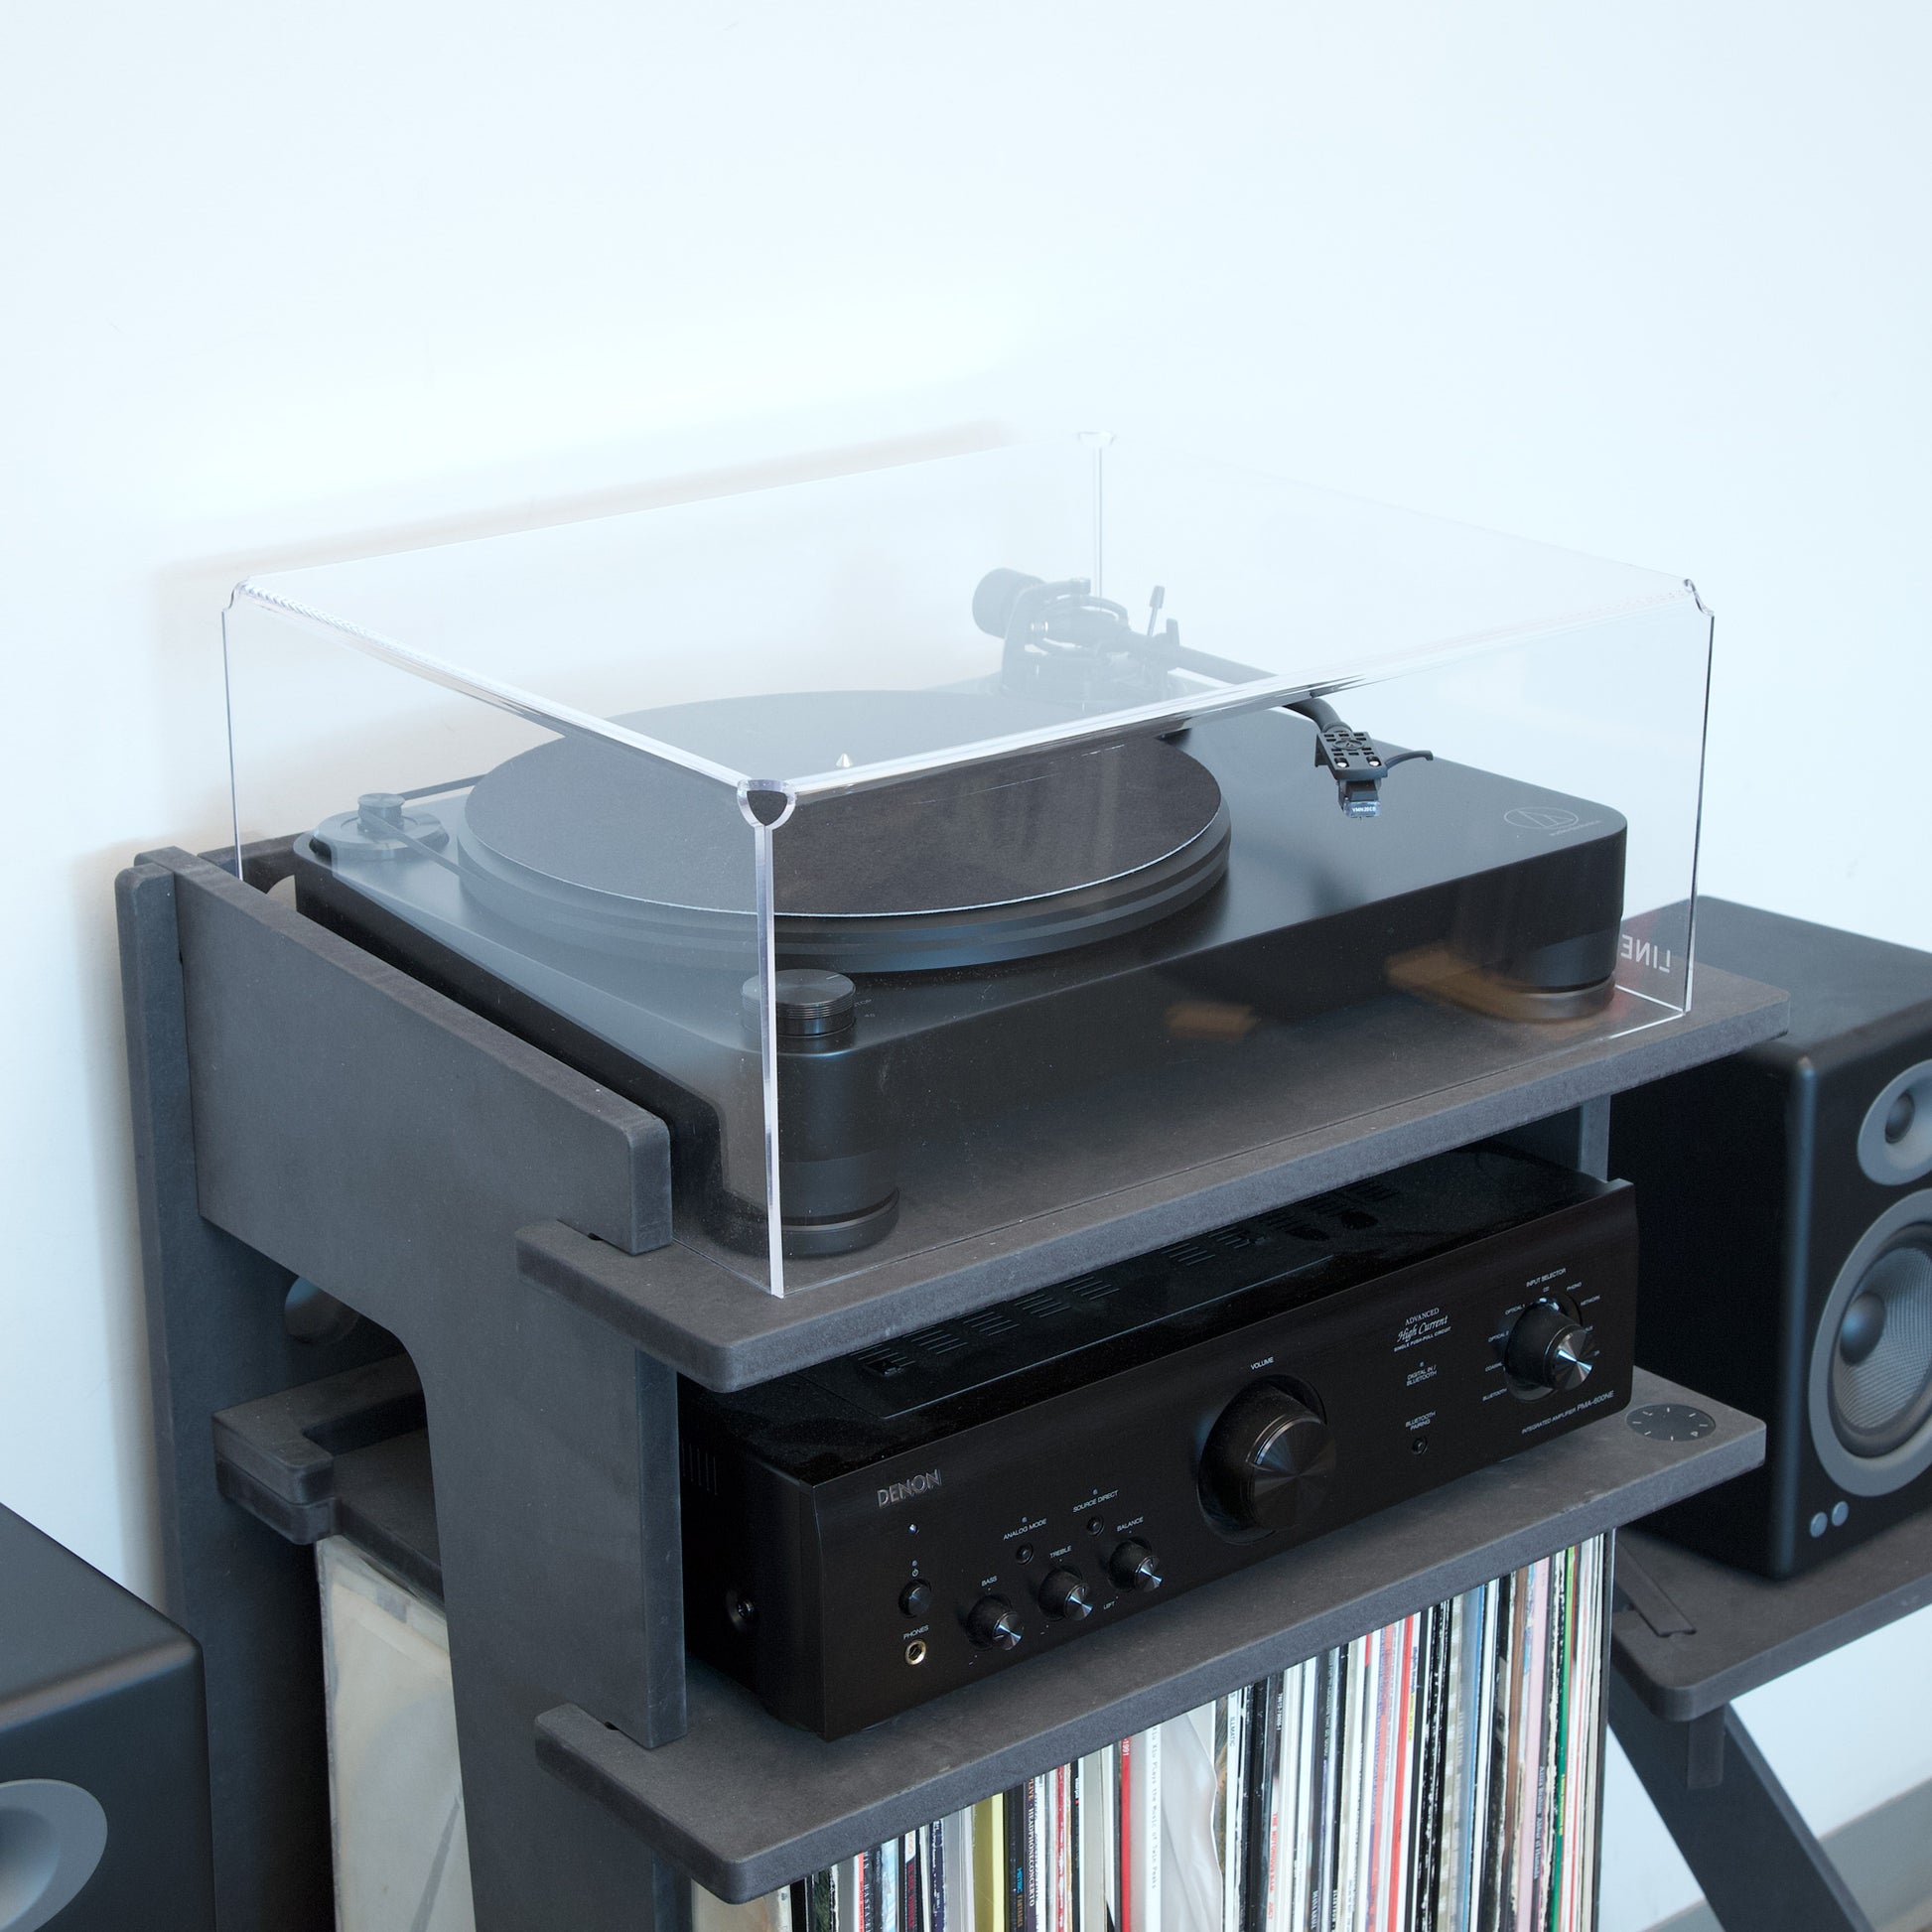 Turntable Universal Acrylic Dust Cover ( 400 x 300 x 50 mm